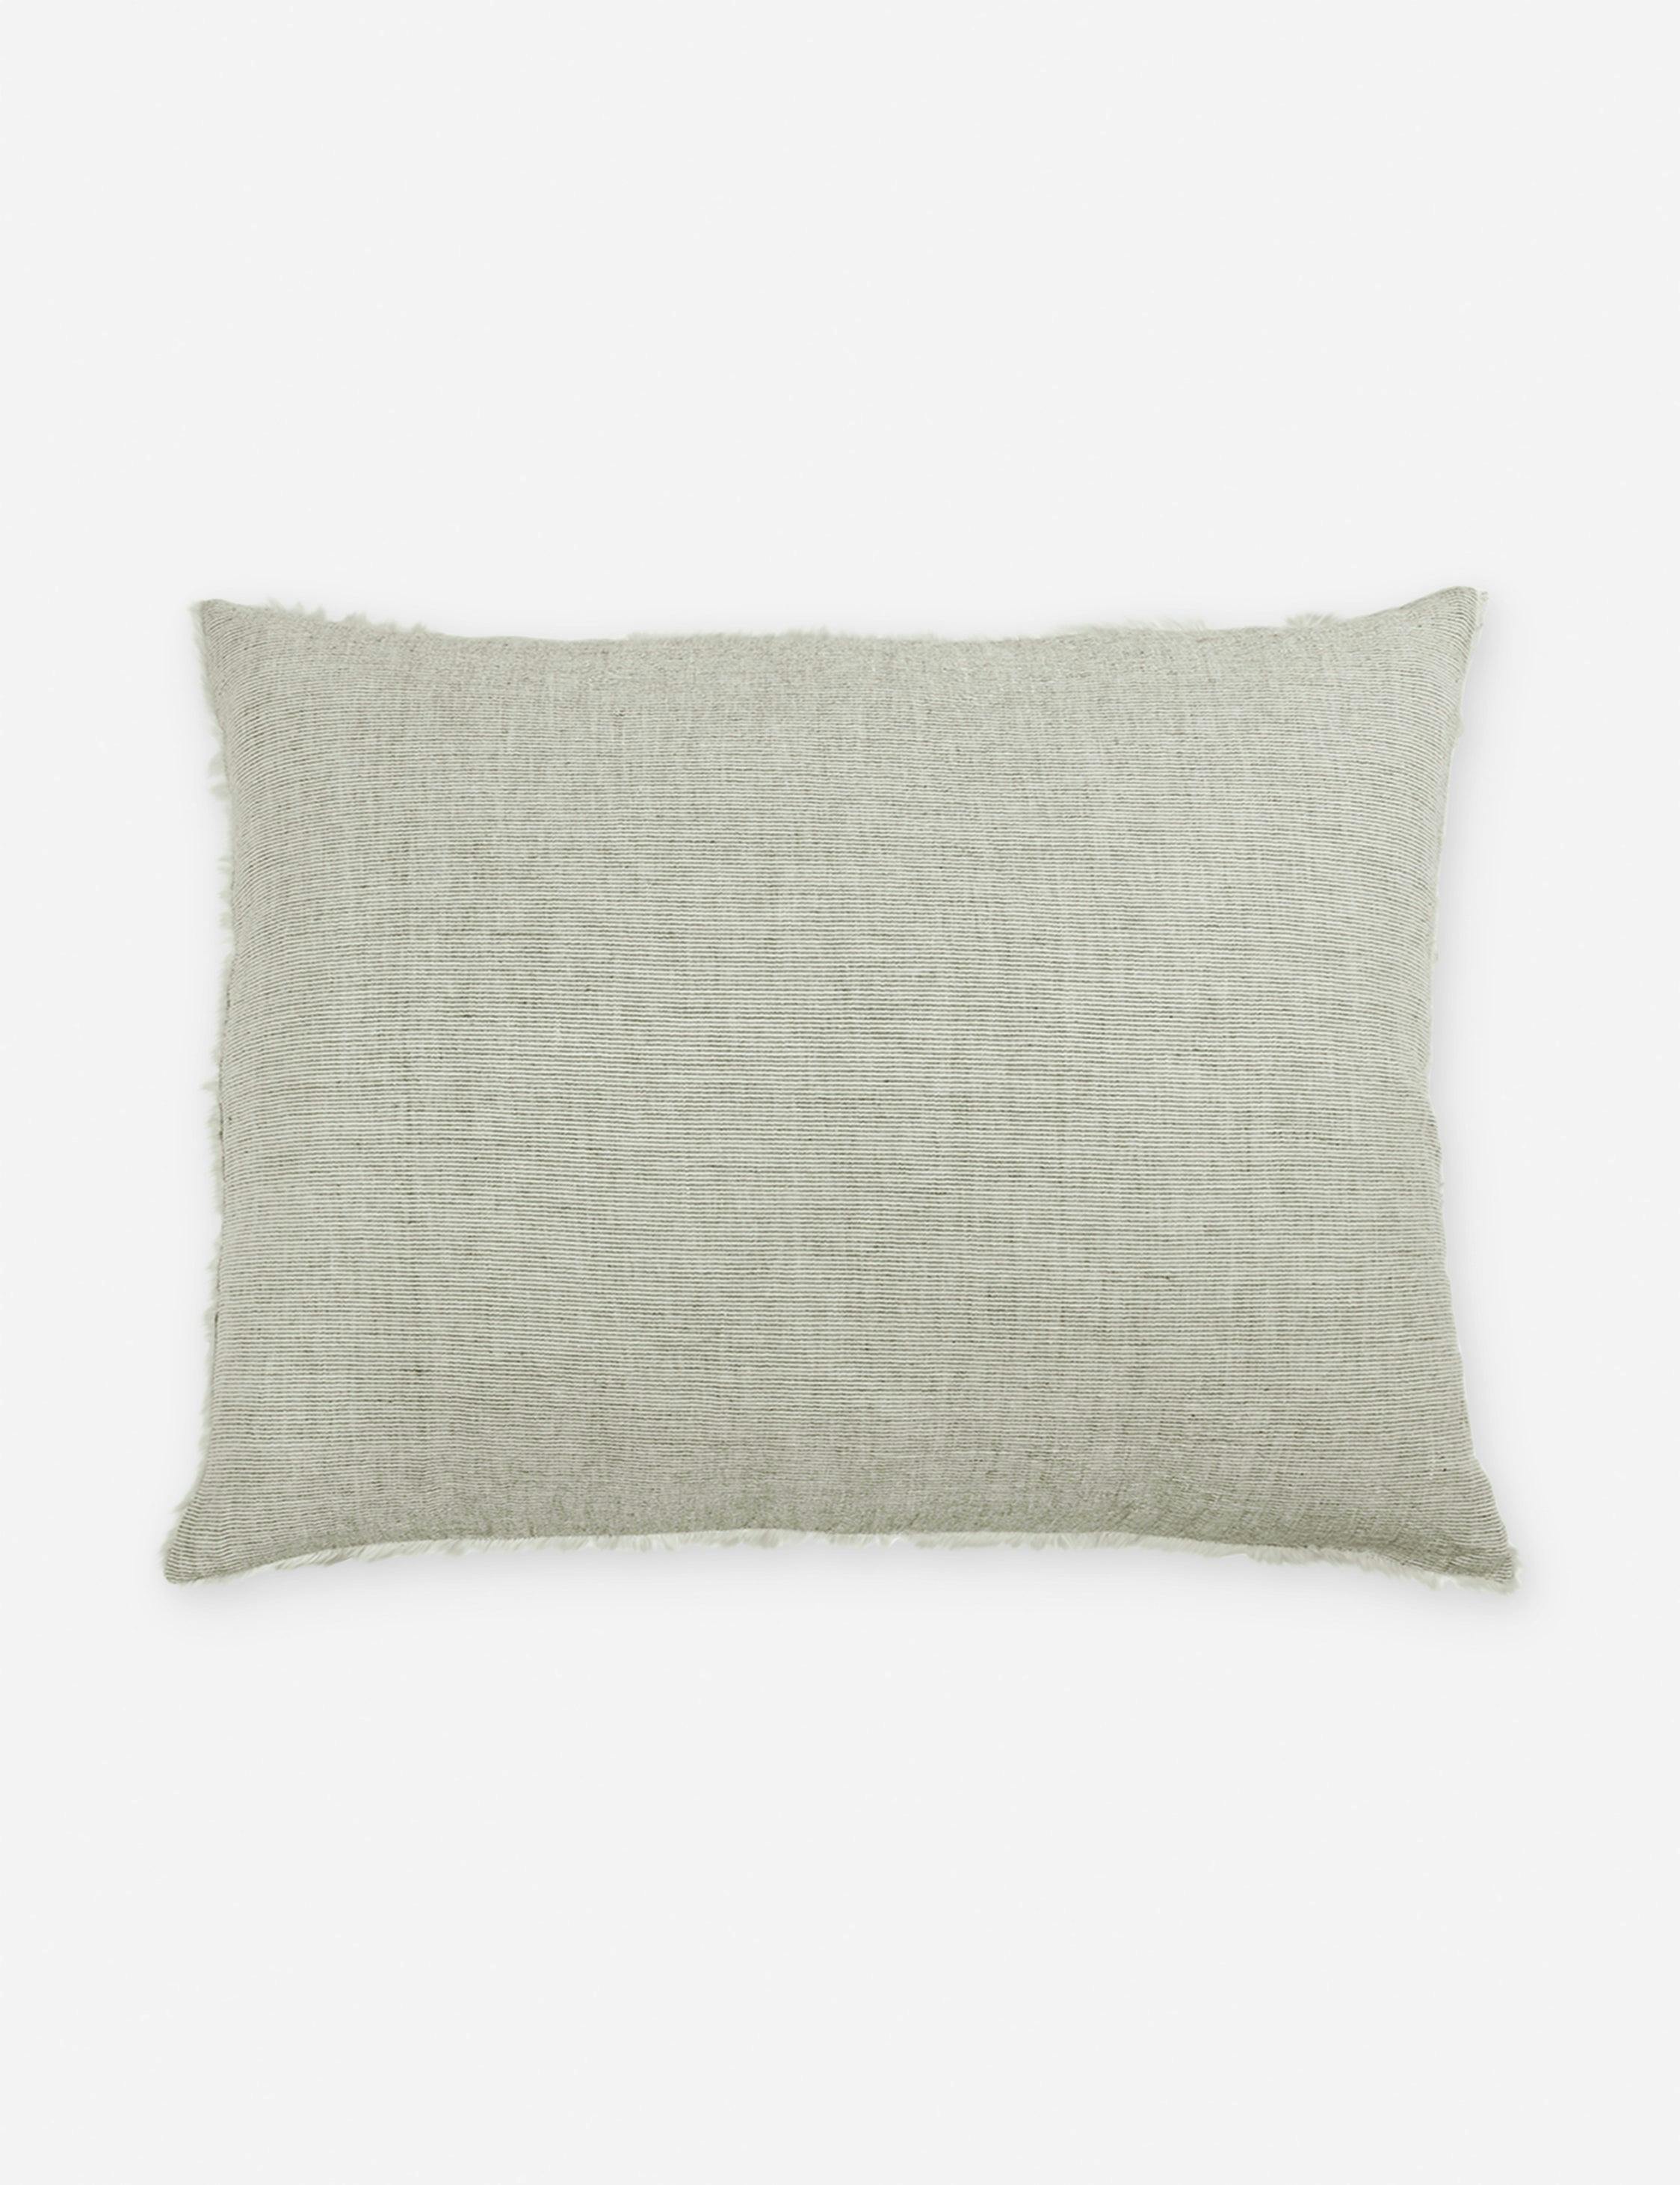 Olive Linen King Sham with Heathered Texture and Frayed Edges